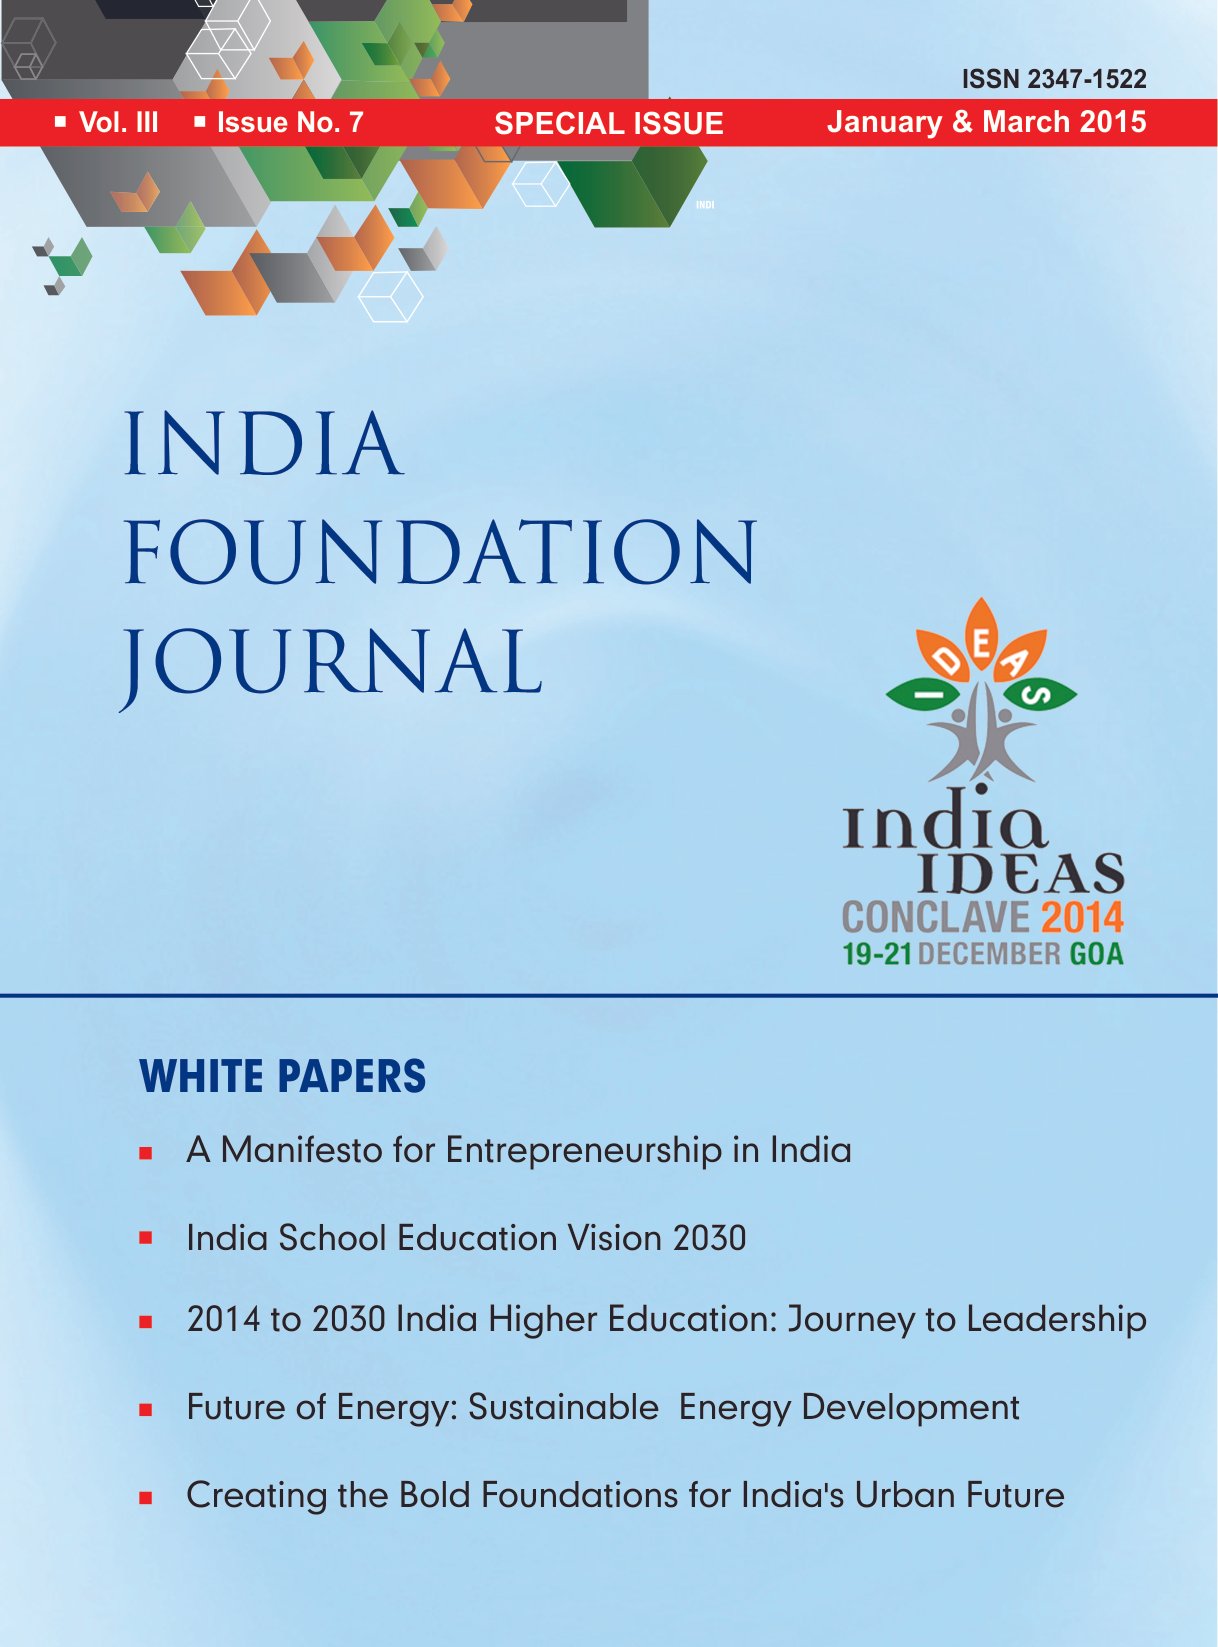 India Foundation Journal – January & March 2015